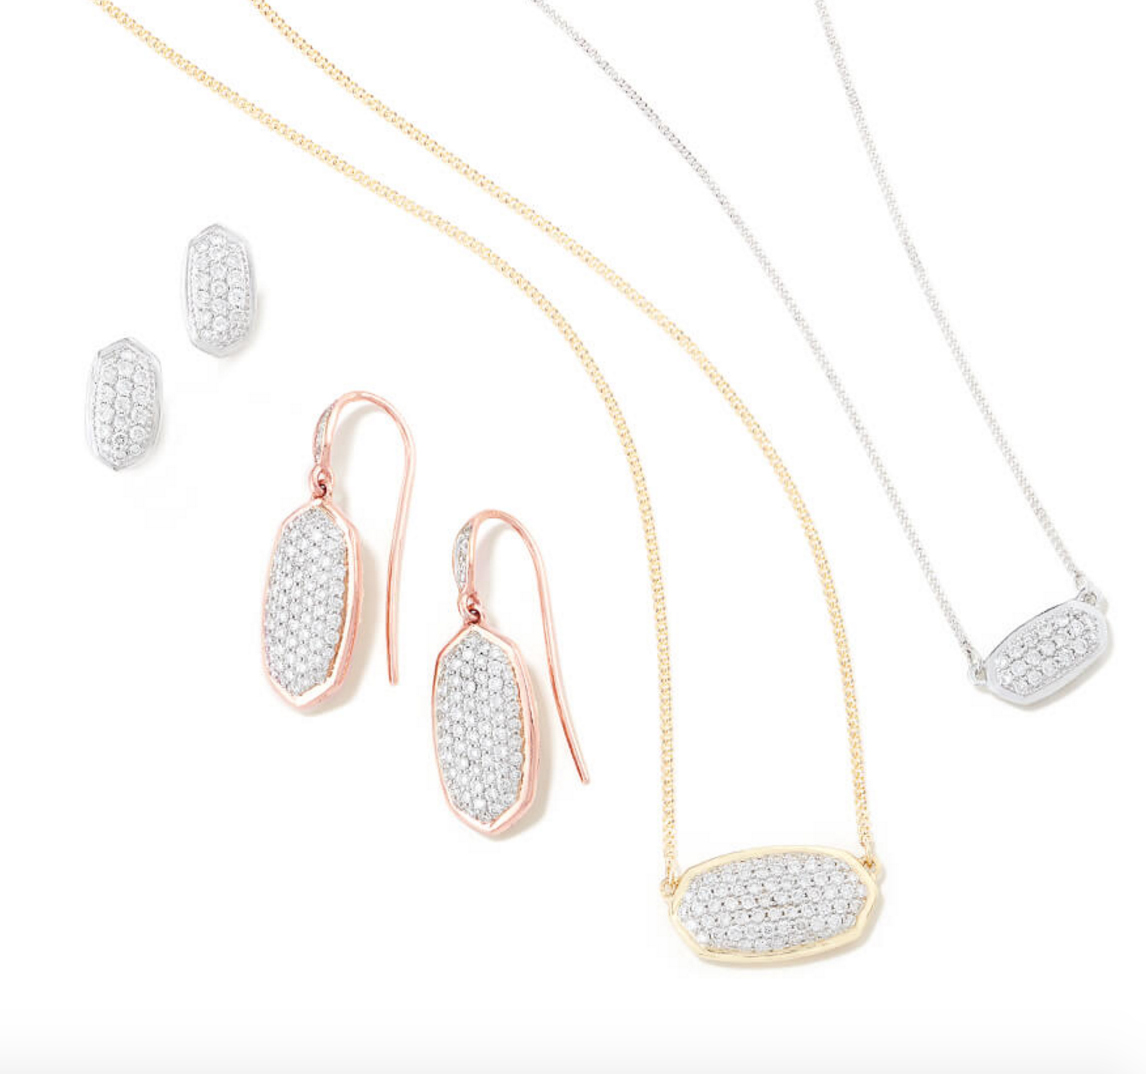 Shop the Kendra Scott Fine Jewelry Collection